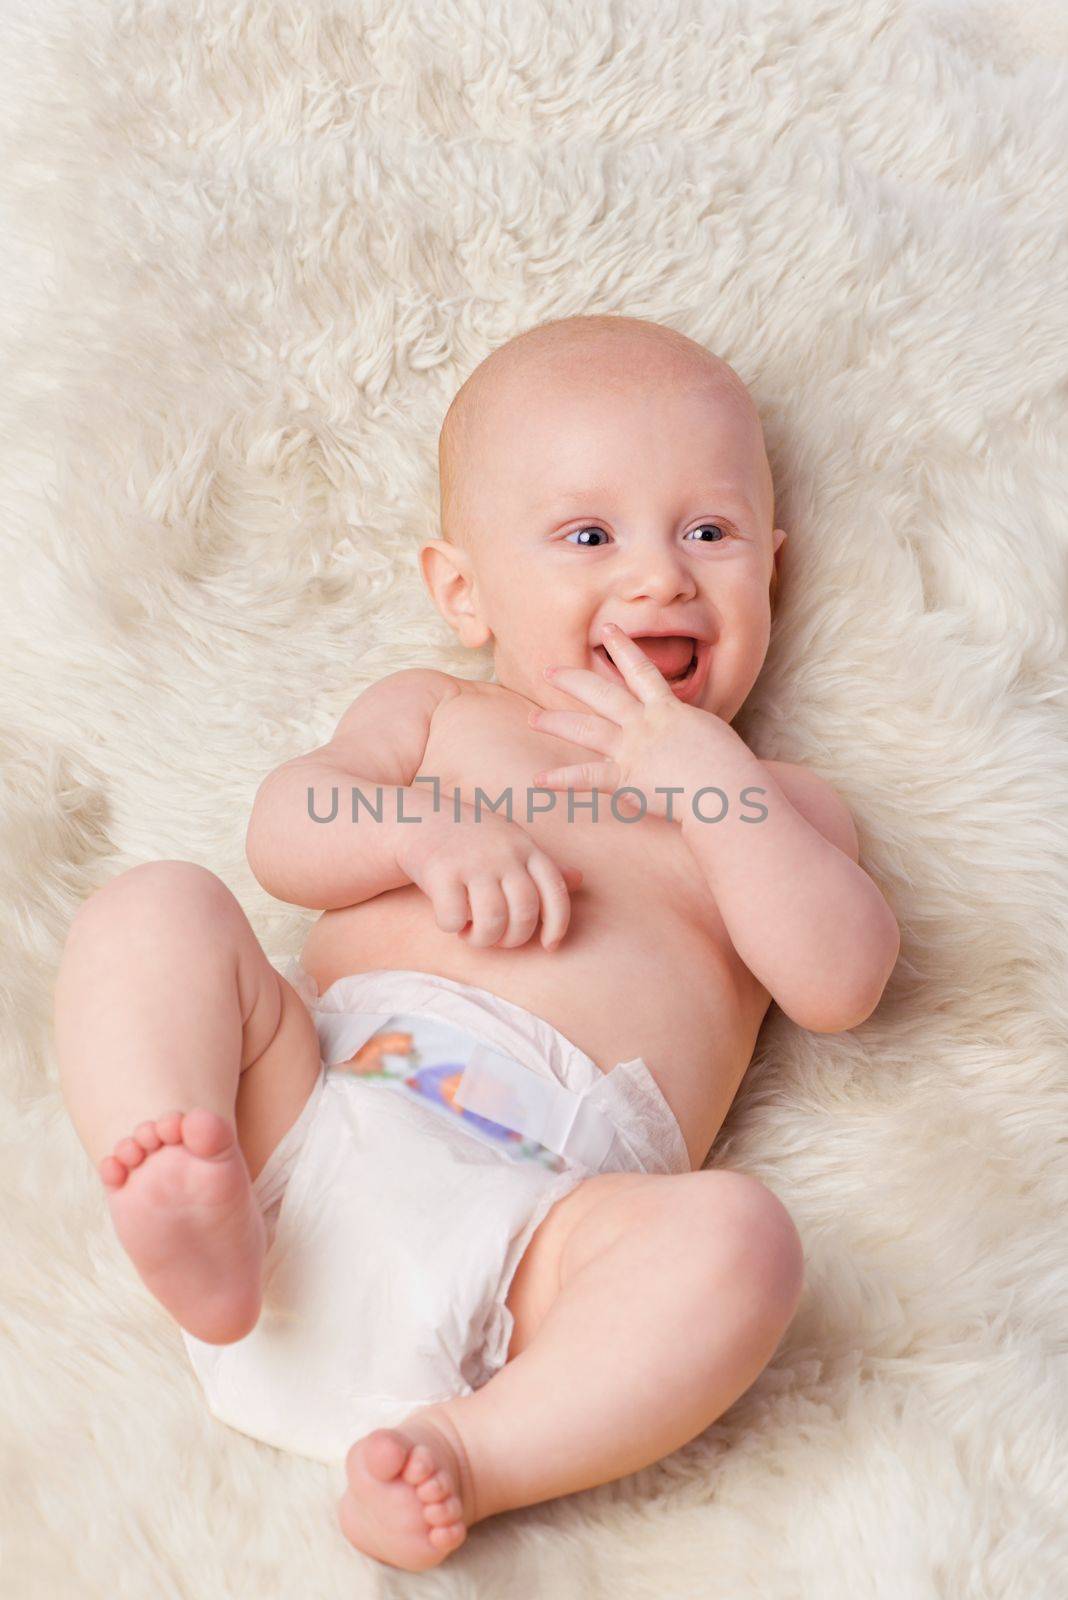 Hes his moms little angel. an adorable baby boy in a studio. by YuriArcurs